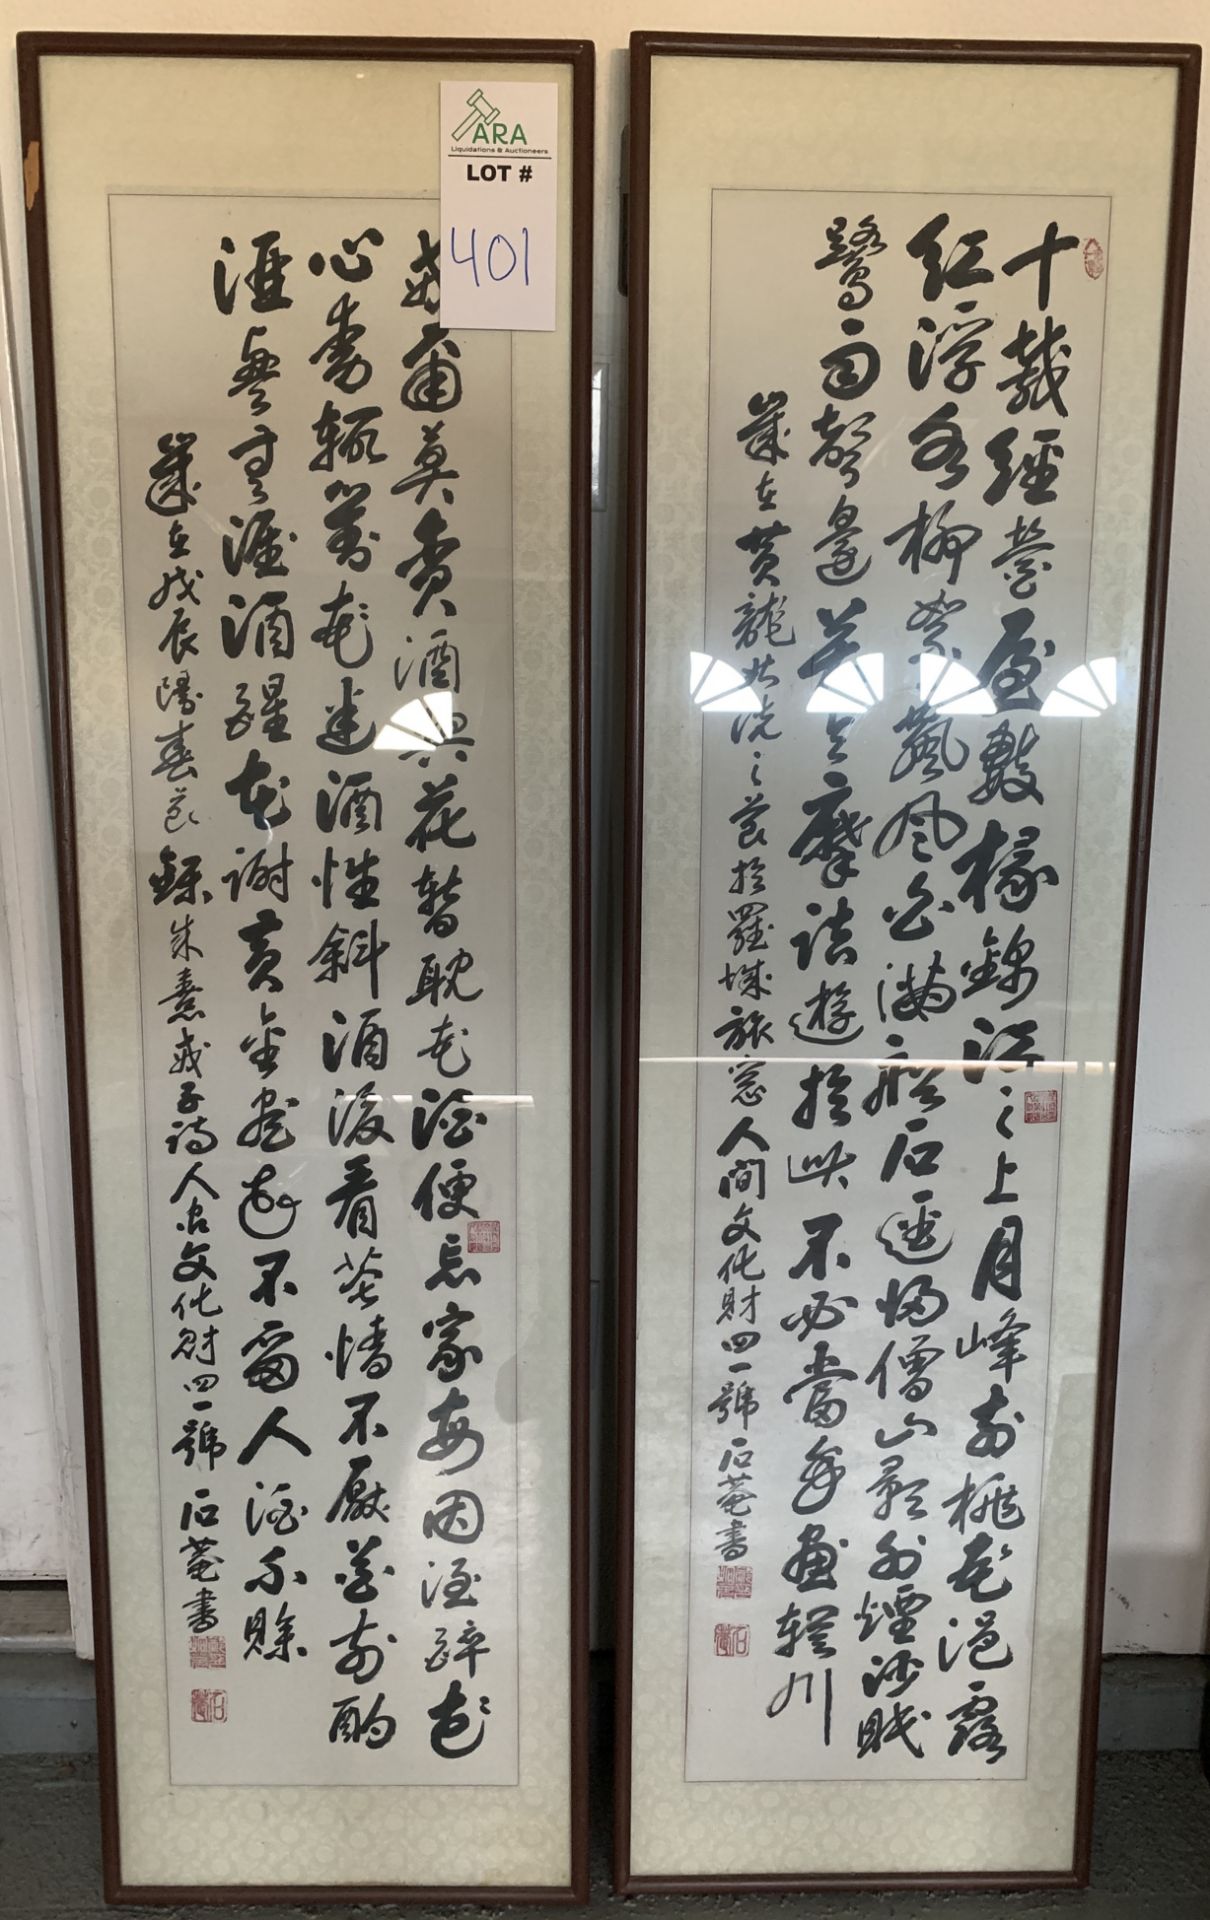 2 ART PIECES WITH ANCIENT CHINESE CHARACTER CALLIGRAPHY DETAILS.  DIMENSIONS EACH: 61X17"